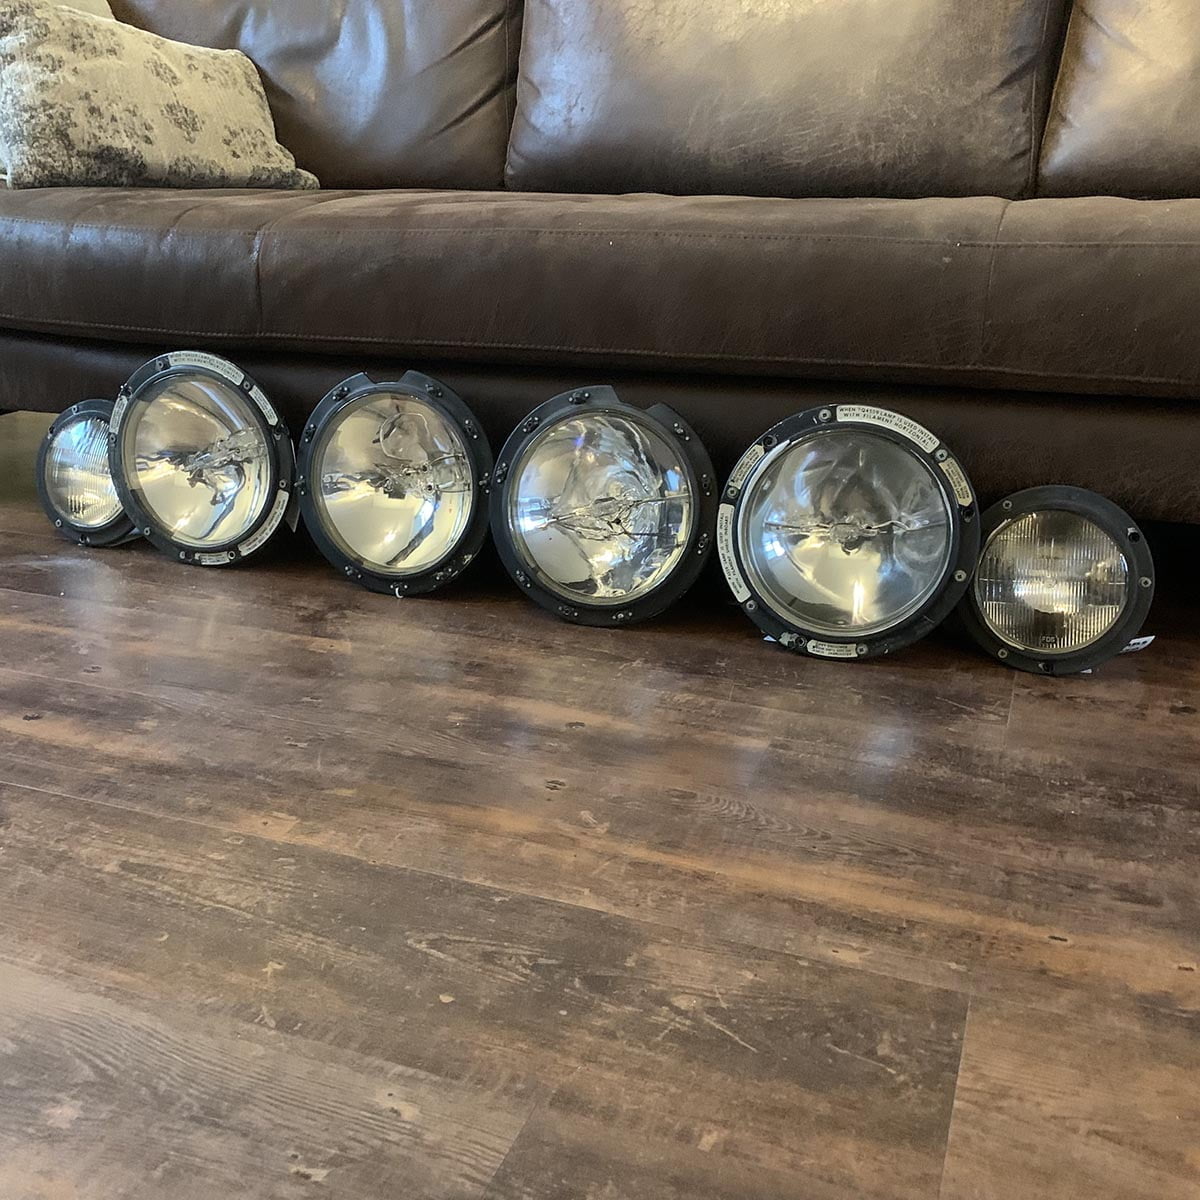 Overview of Boeing 747 lights for sale.